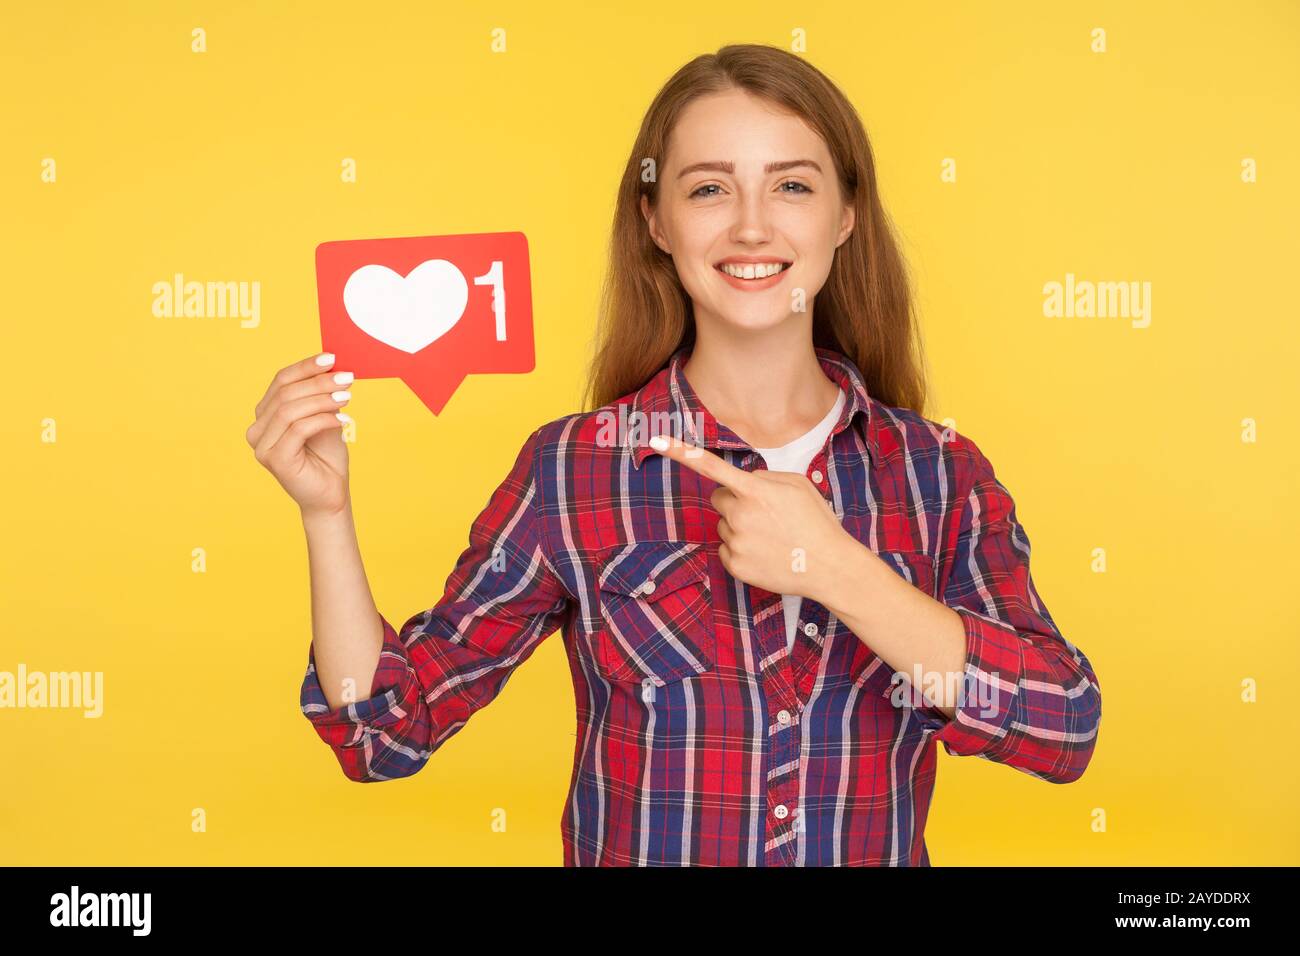 Push heart button to enjoy content. Portrait of happy ginger girl in checkered shirt pointing at social media like icon, follower notification symbol. Stock Photo